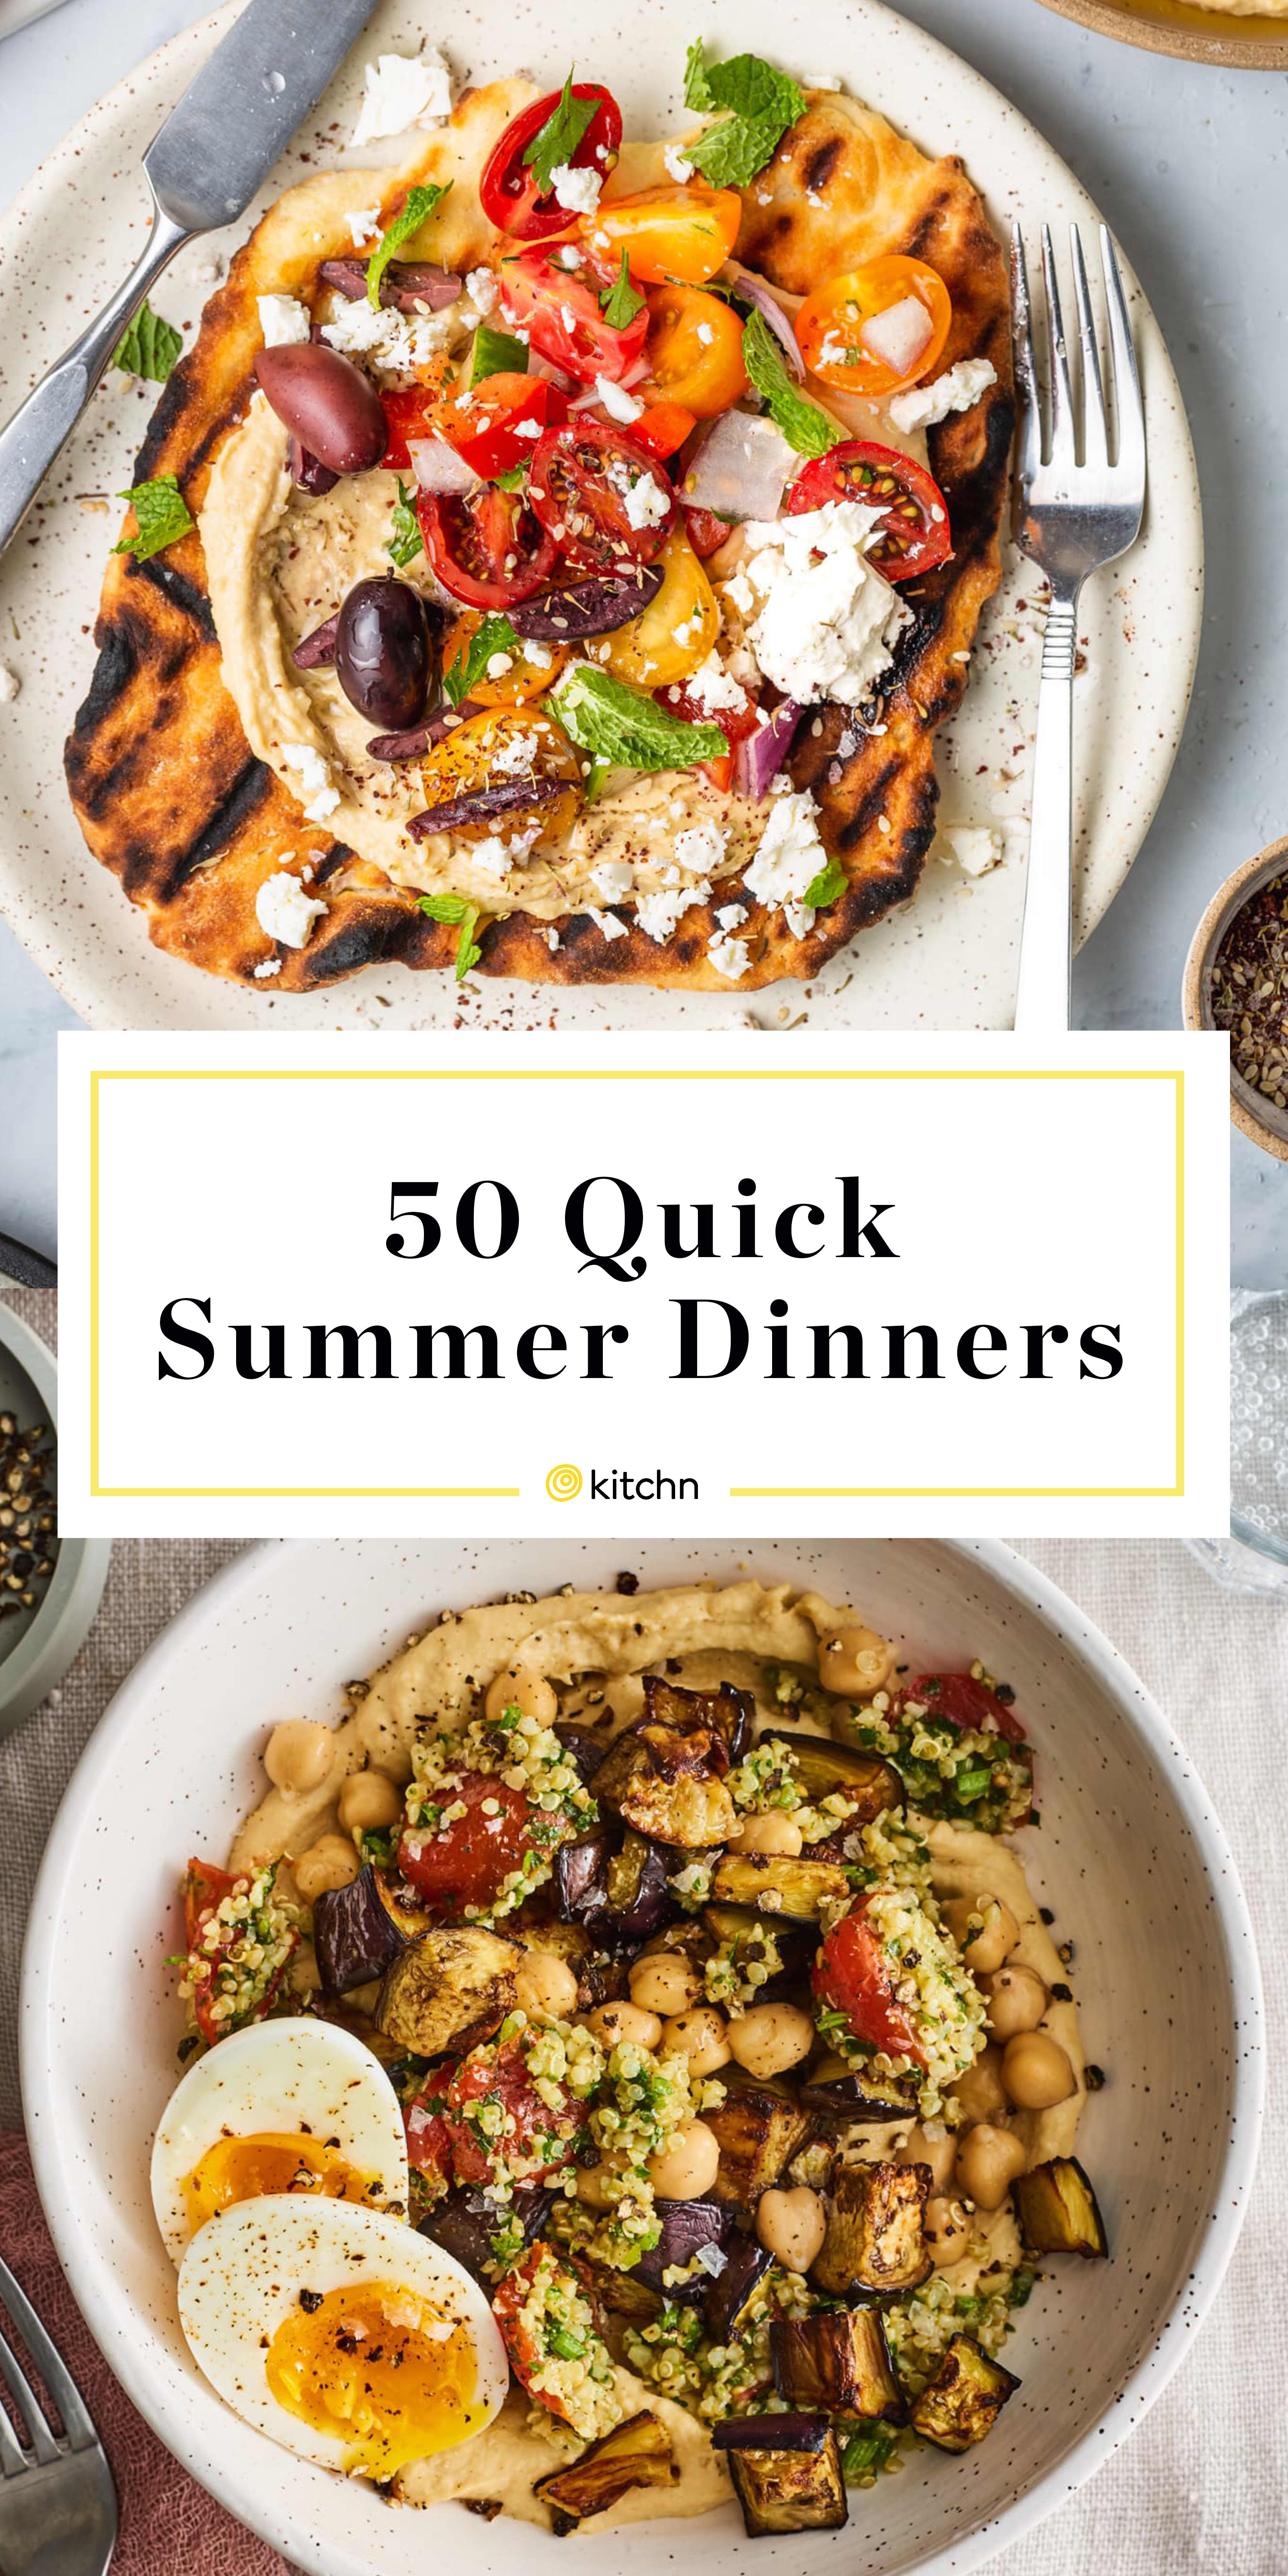 50 Summer Dinner Ideas Easy Meal Recipes For Hot Days Kitchn